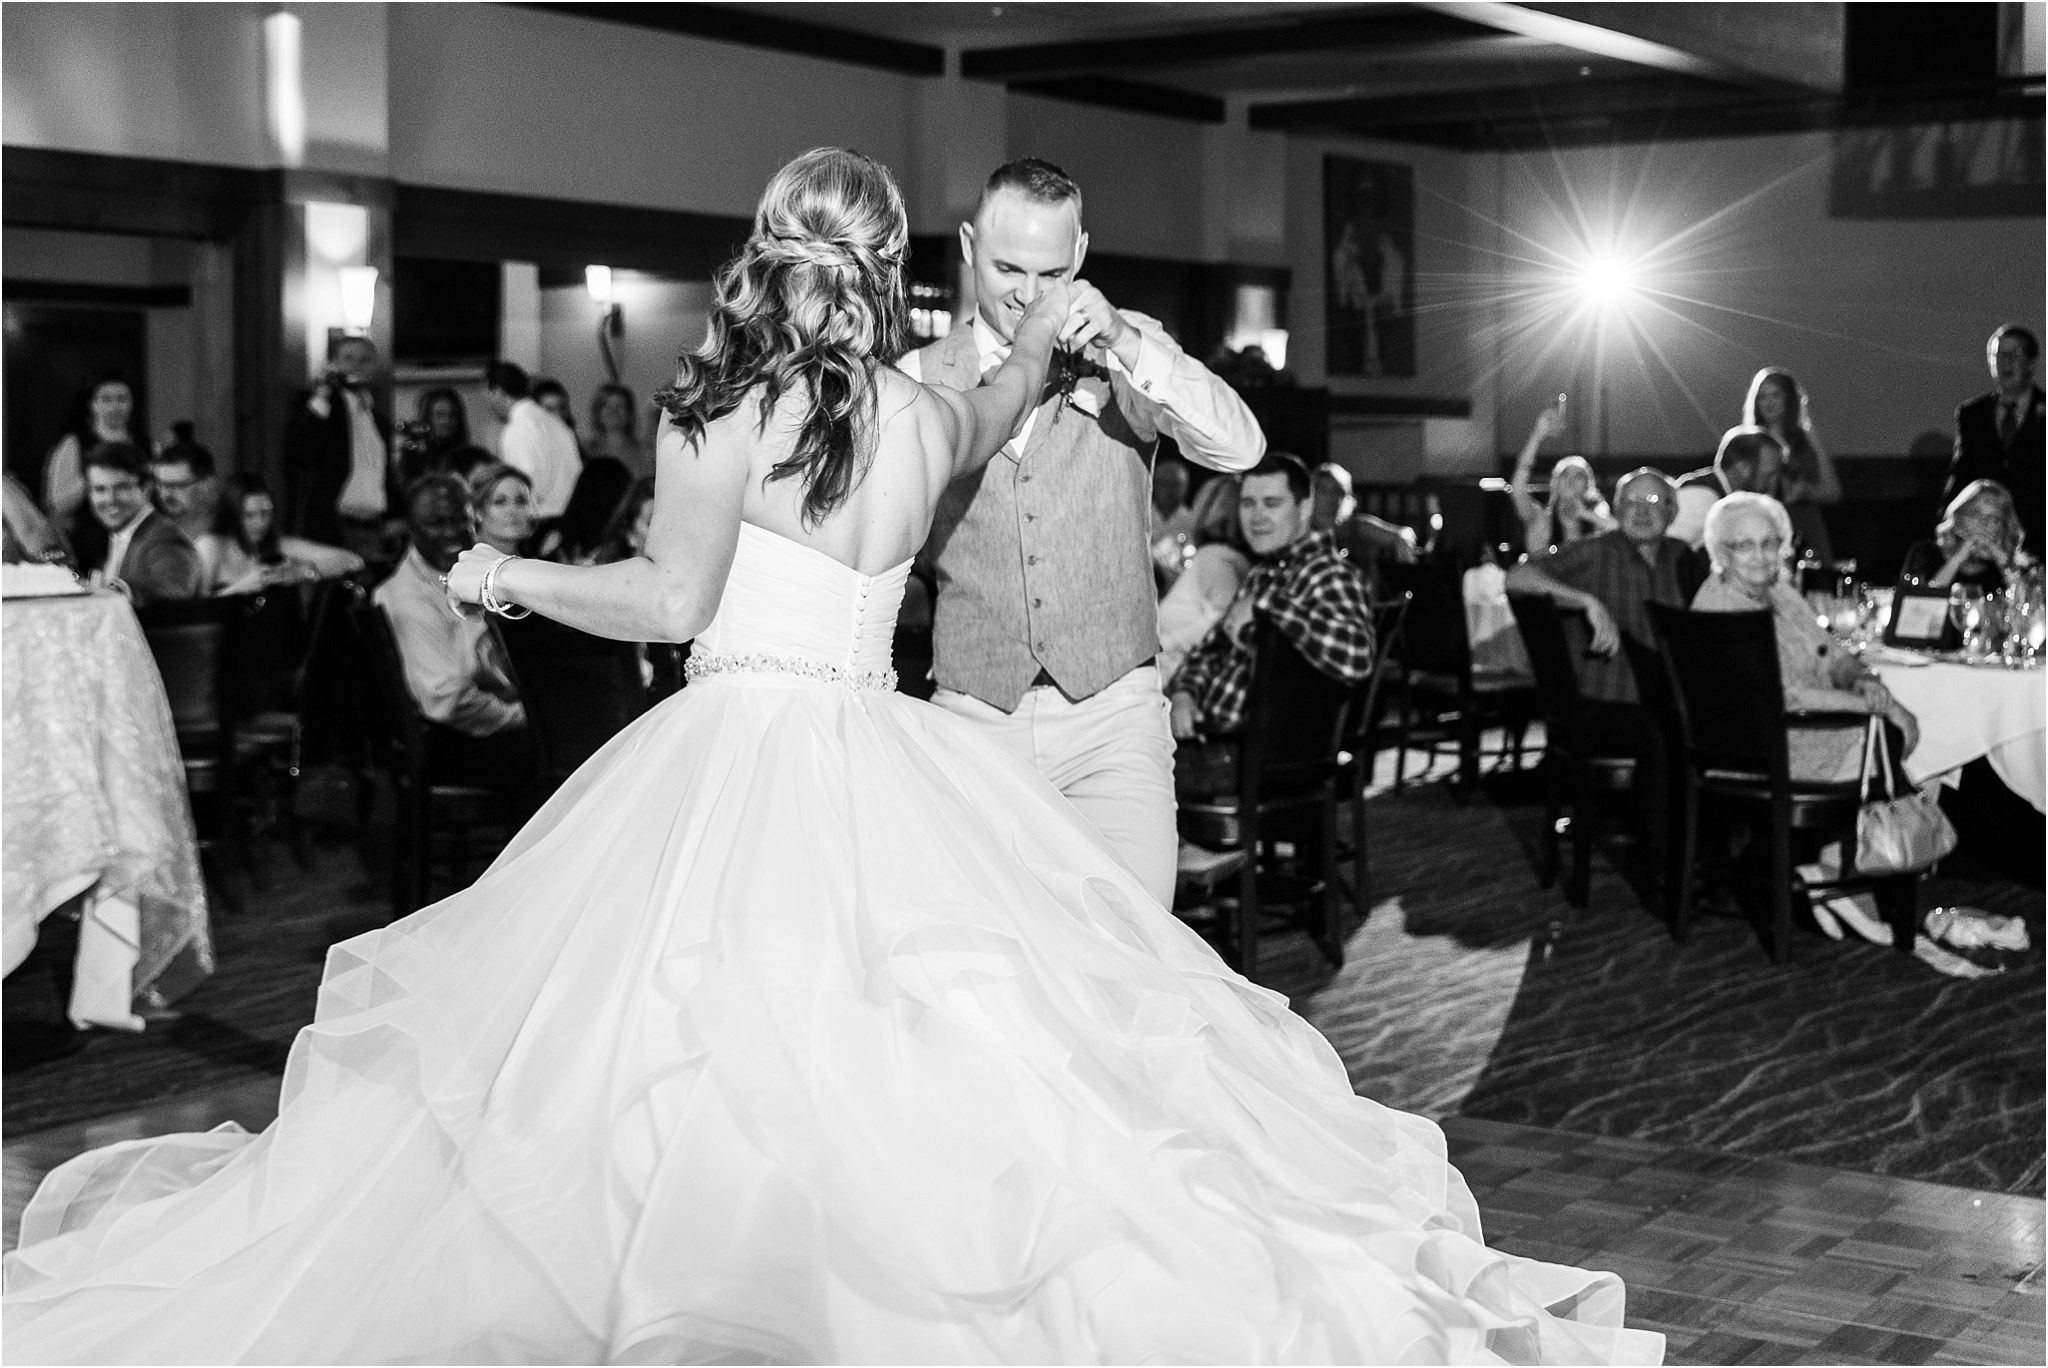 The Lodge at Ventana Canyon black and white wedding photo of bride and groom's first dance